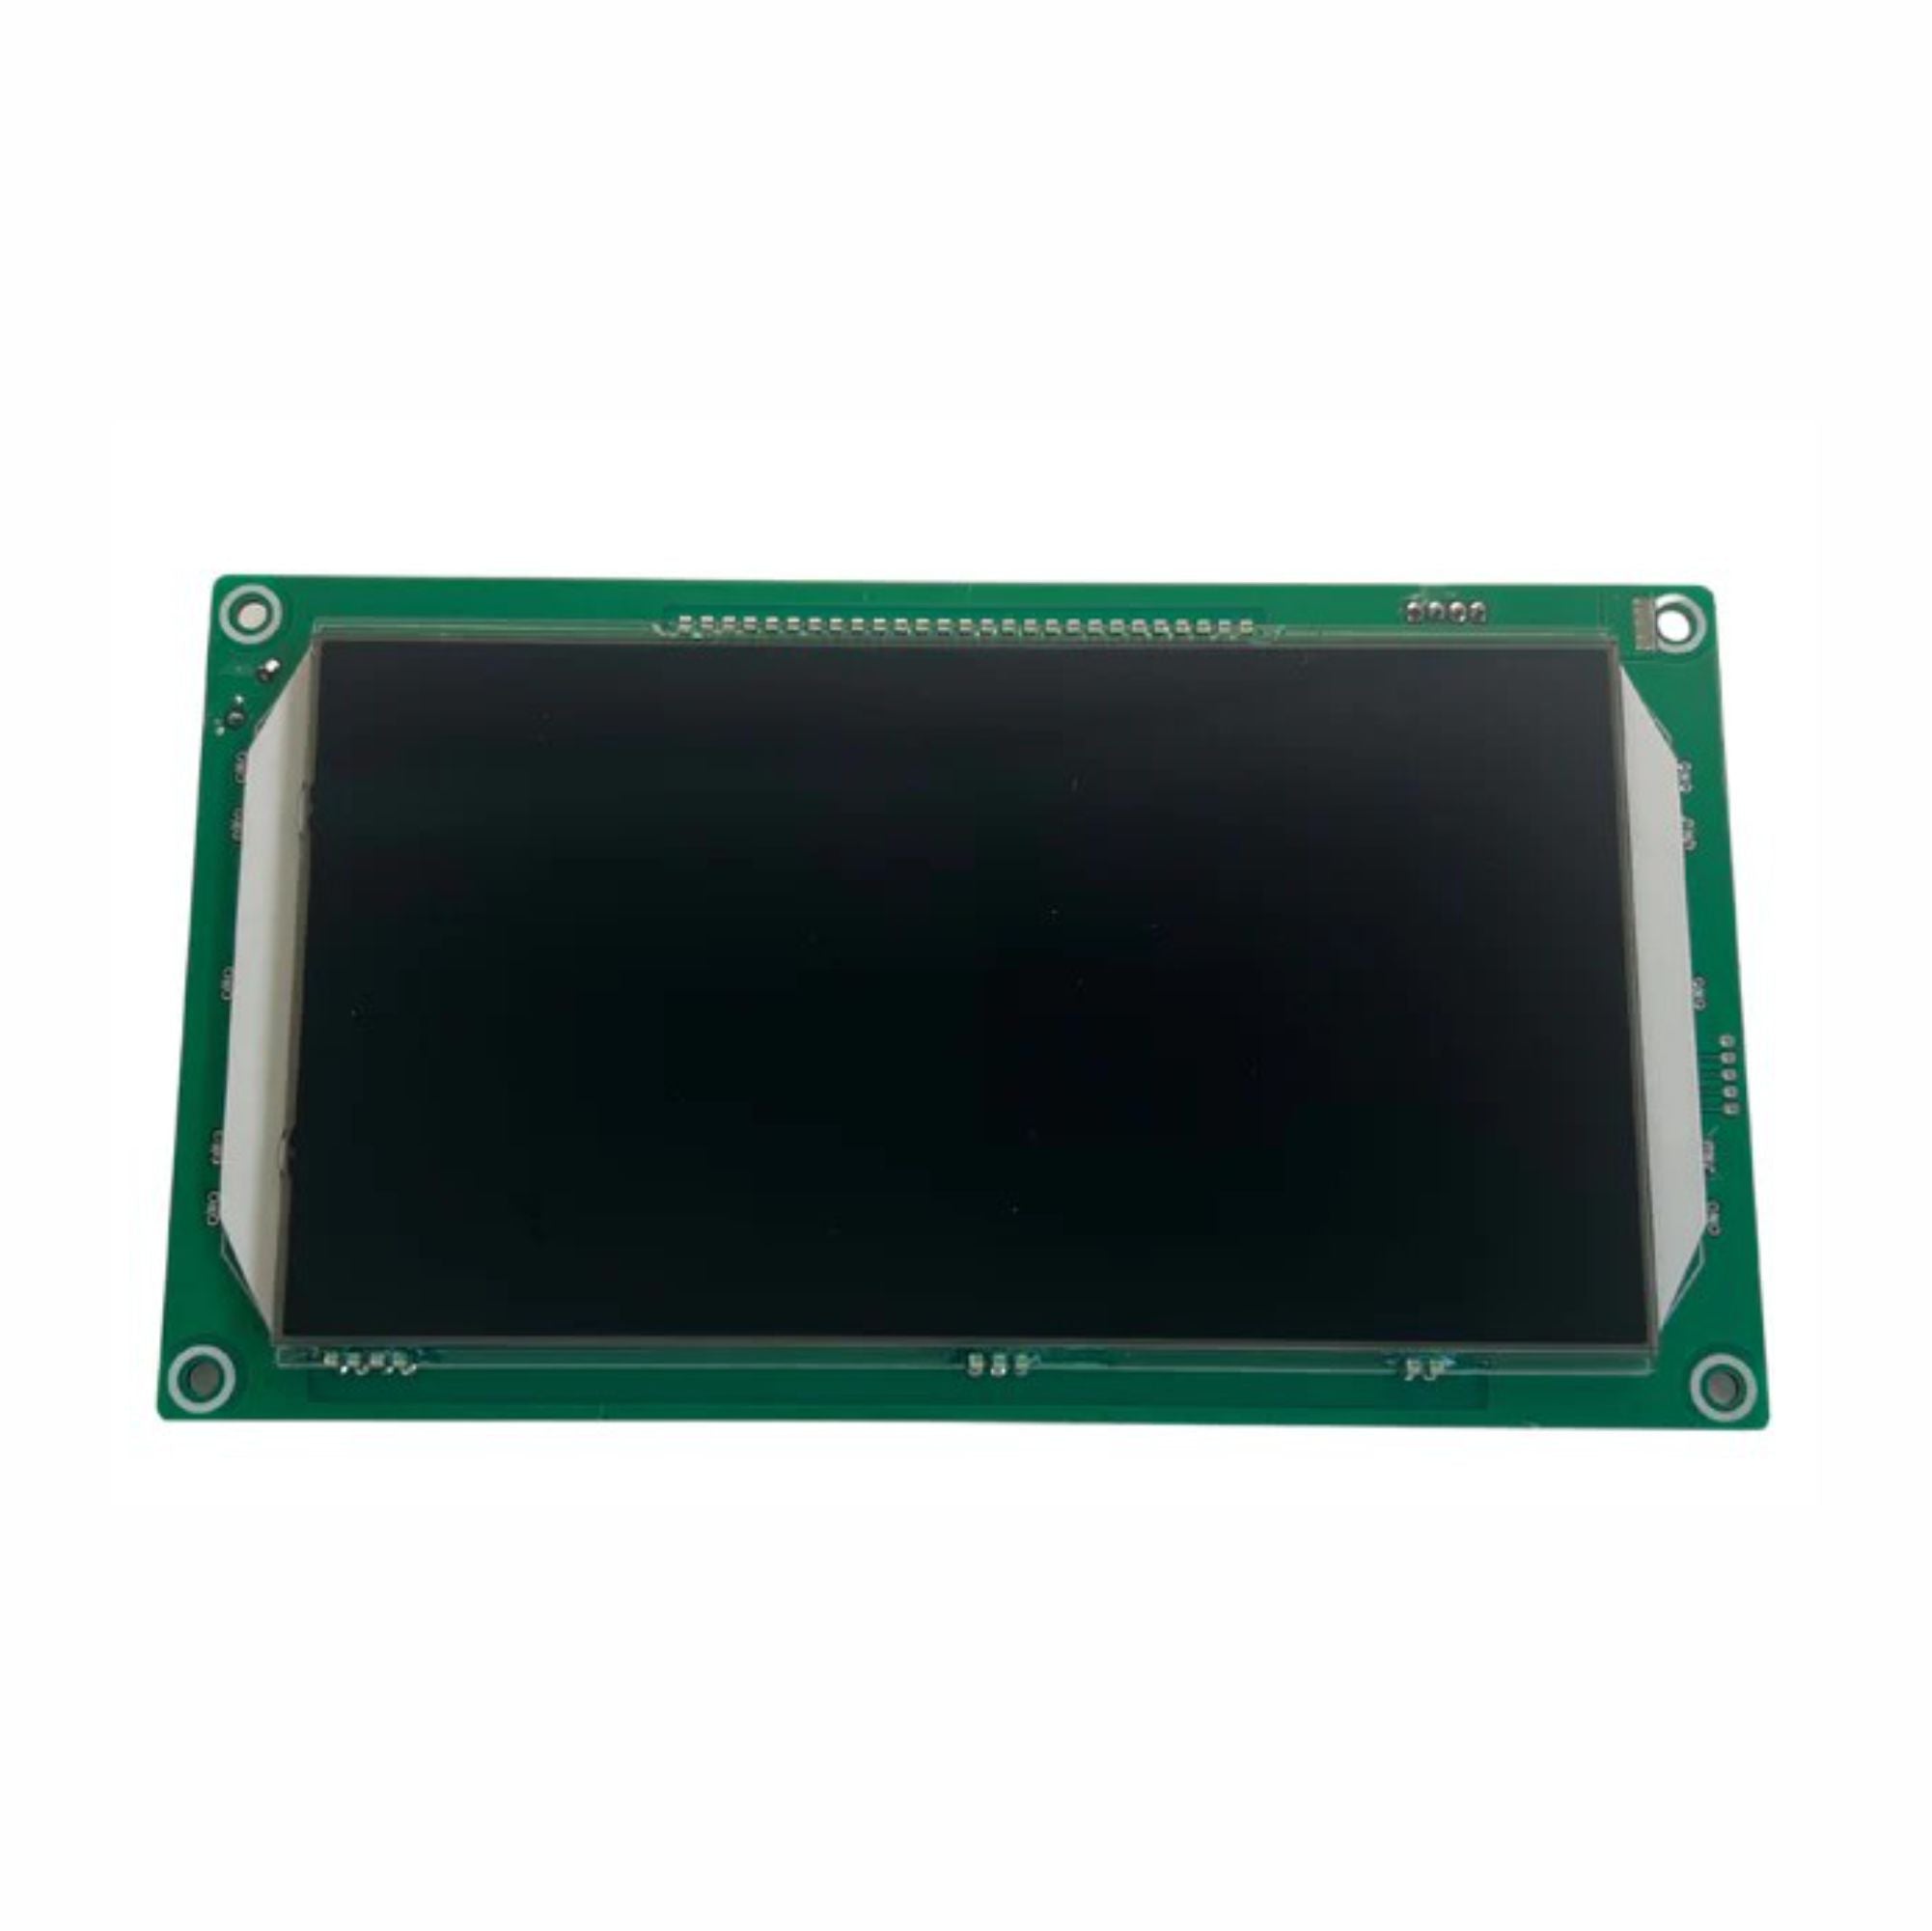 LCD Screen For Dryer H6501